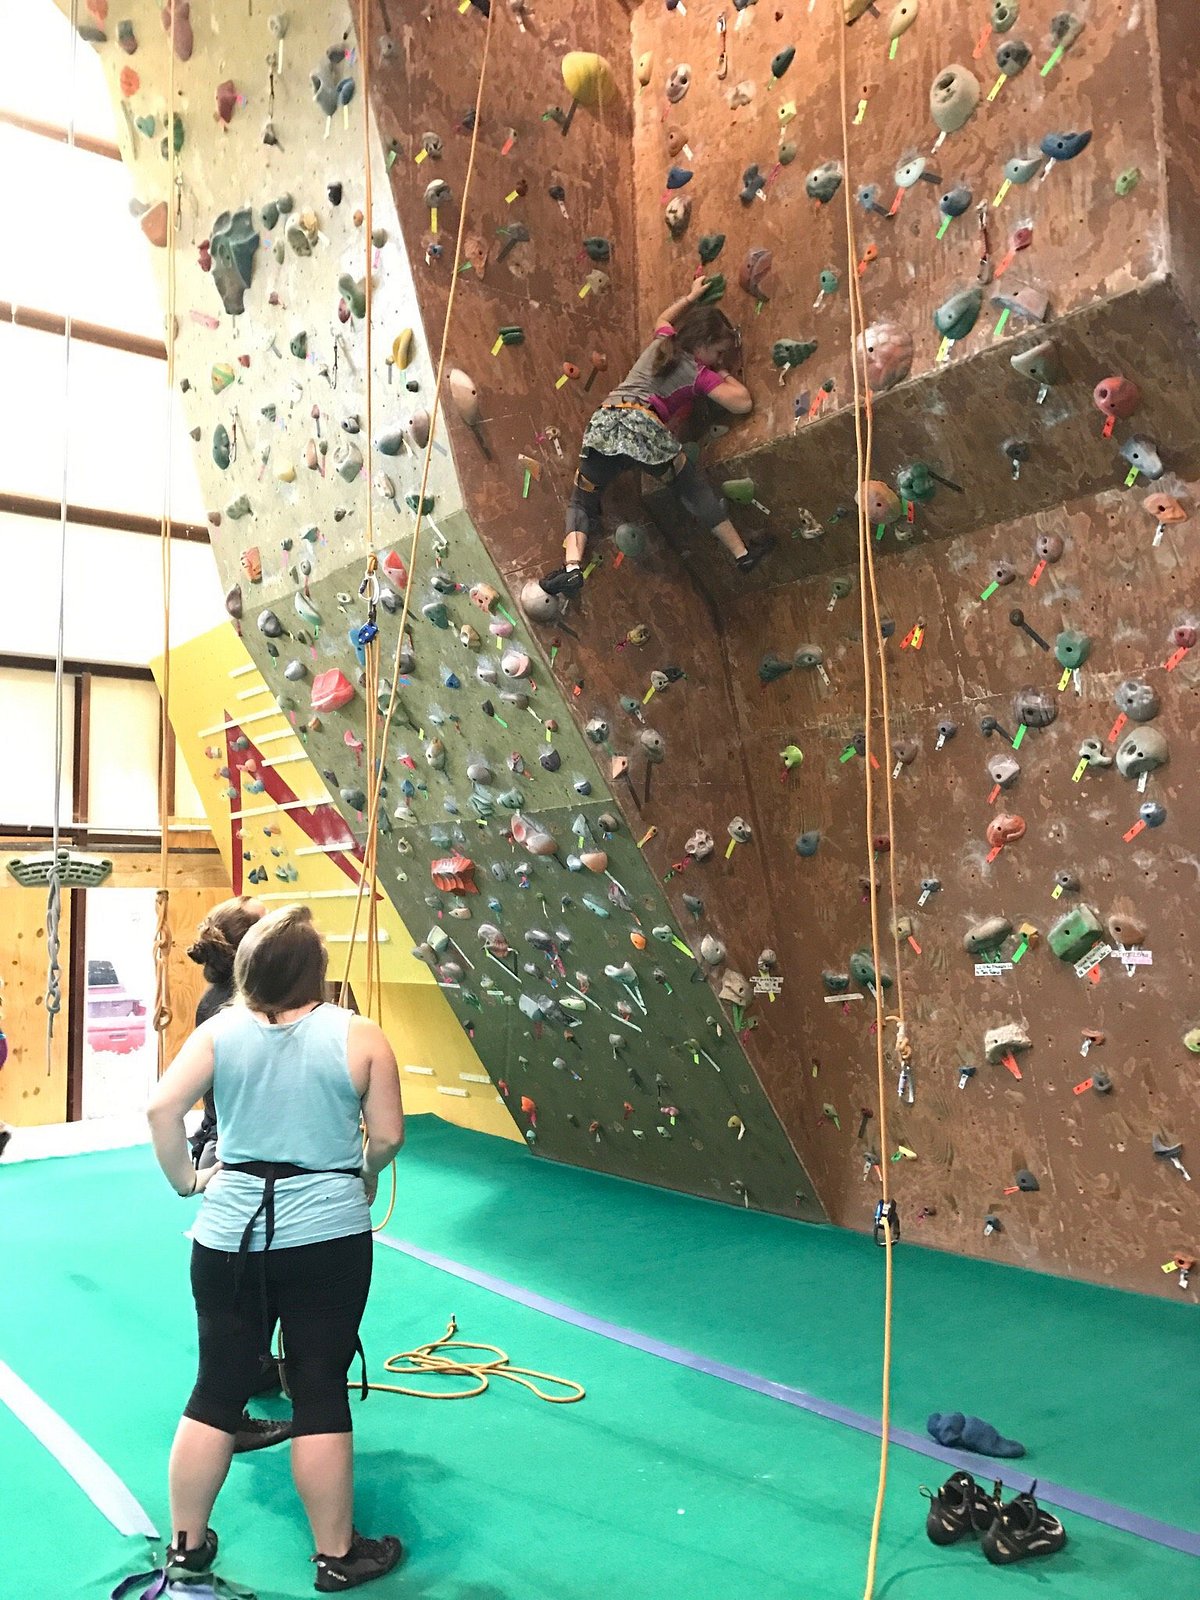 Ascension Indoor Rock Climbing Gym - All You Need to Know BEFORE